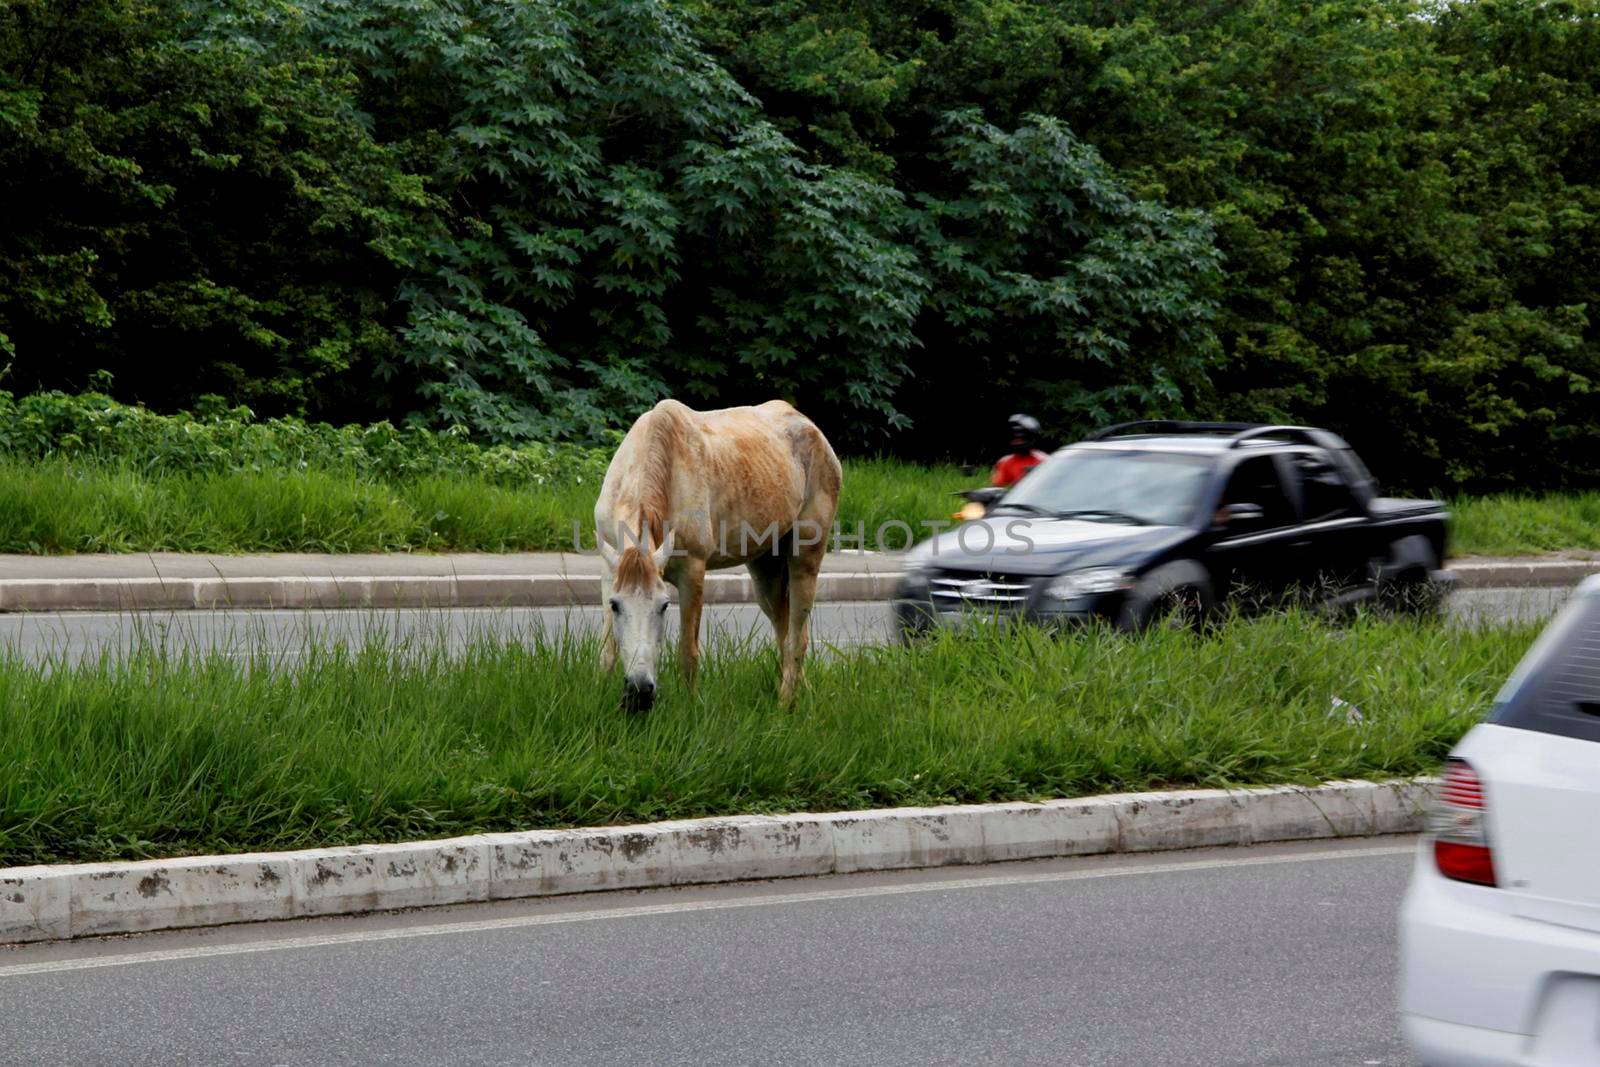 salvador, bahia / brazil - july 8, 2013: horse is seen grazing loose in the central construction site of Avenida Luiz Eduardo Magalhaes in the city of Salvador. A danger to drivers traveling on the spot.

